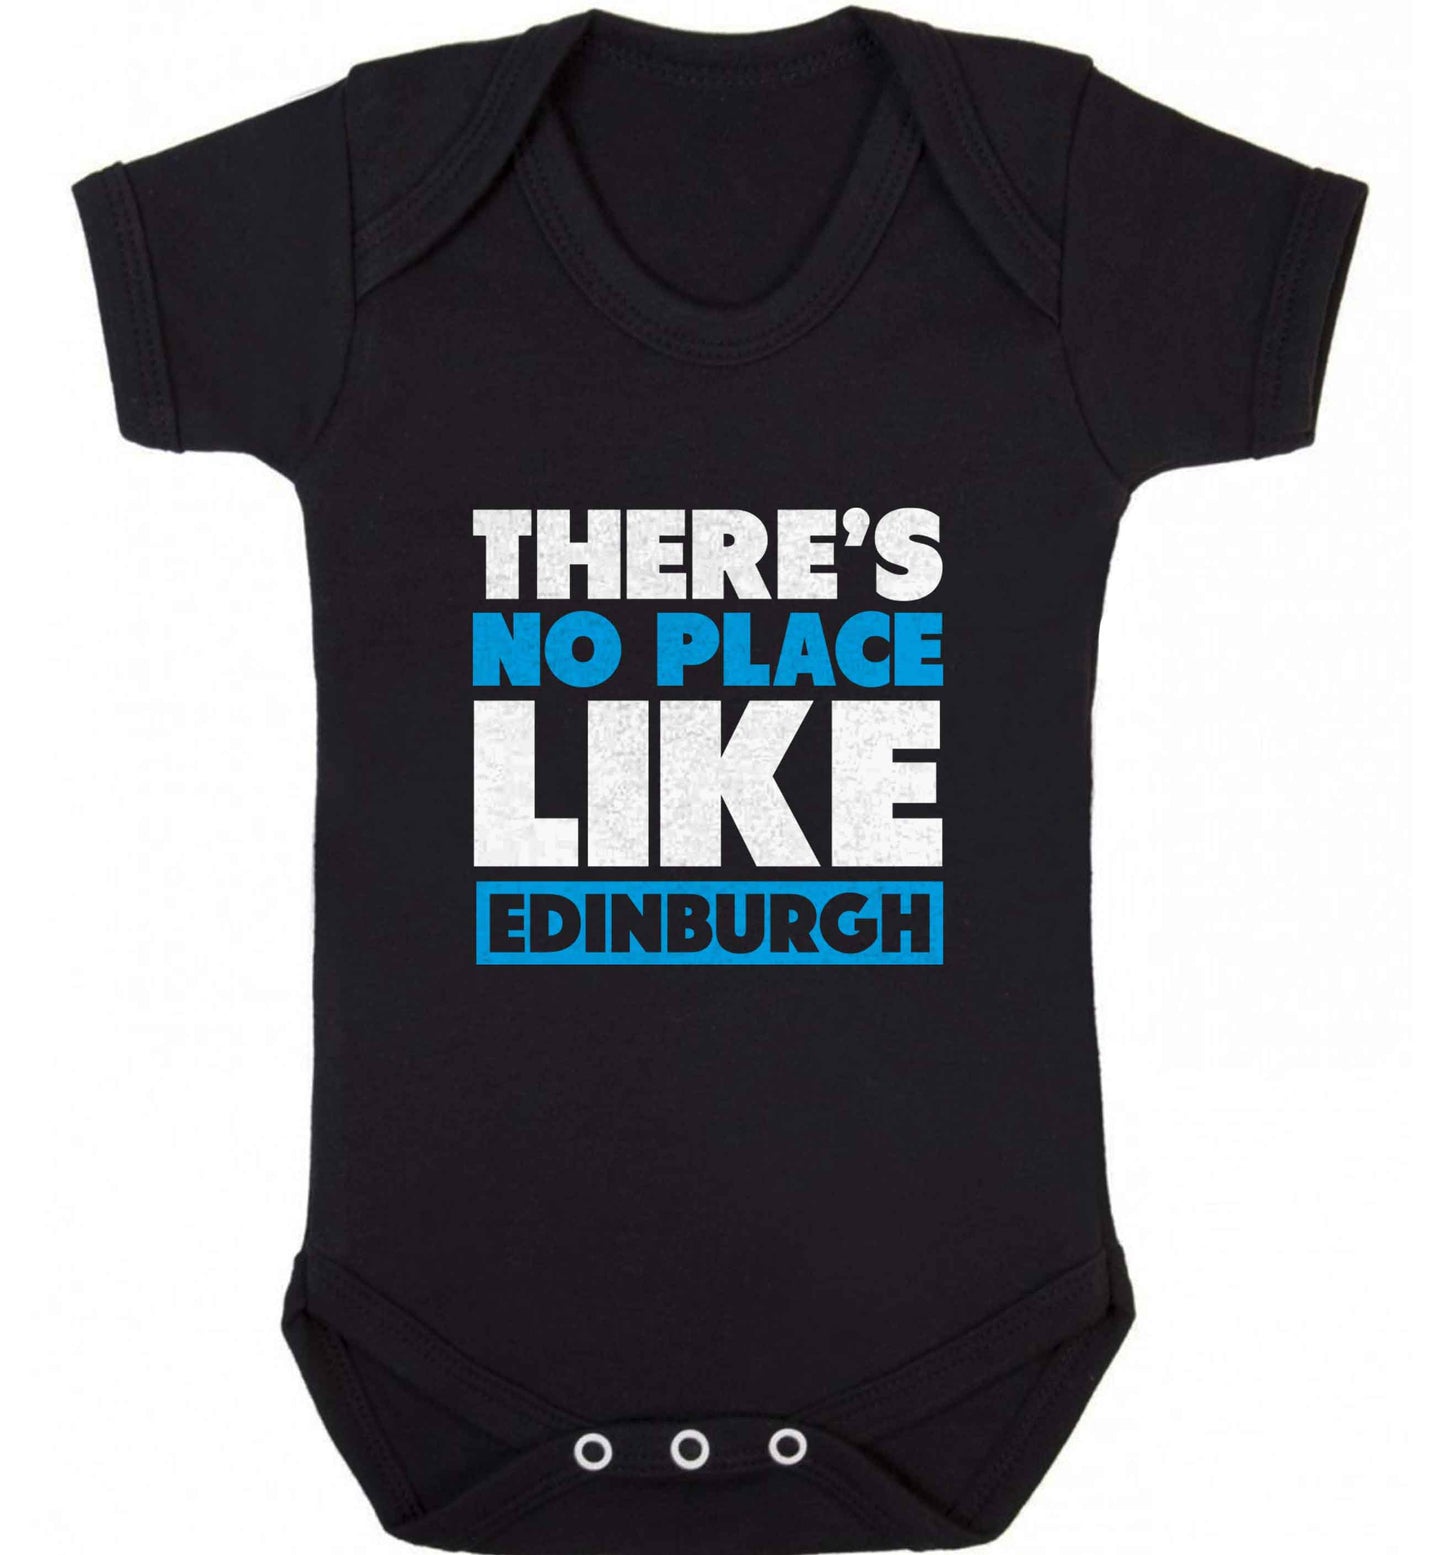 There's no place like Edinburgh baby vest black 18-24 months